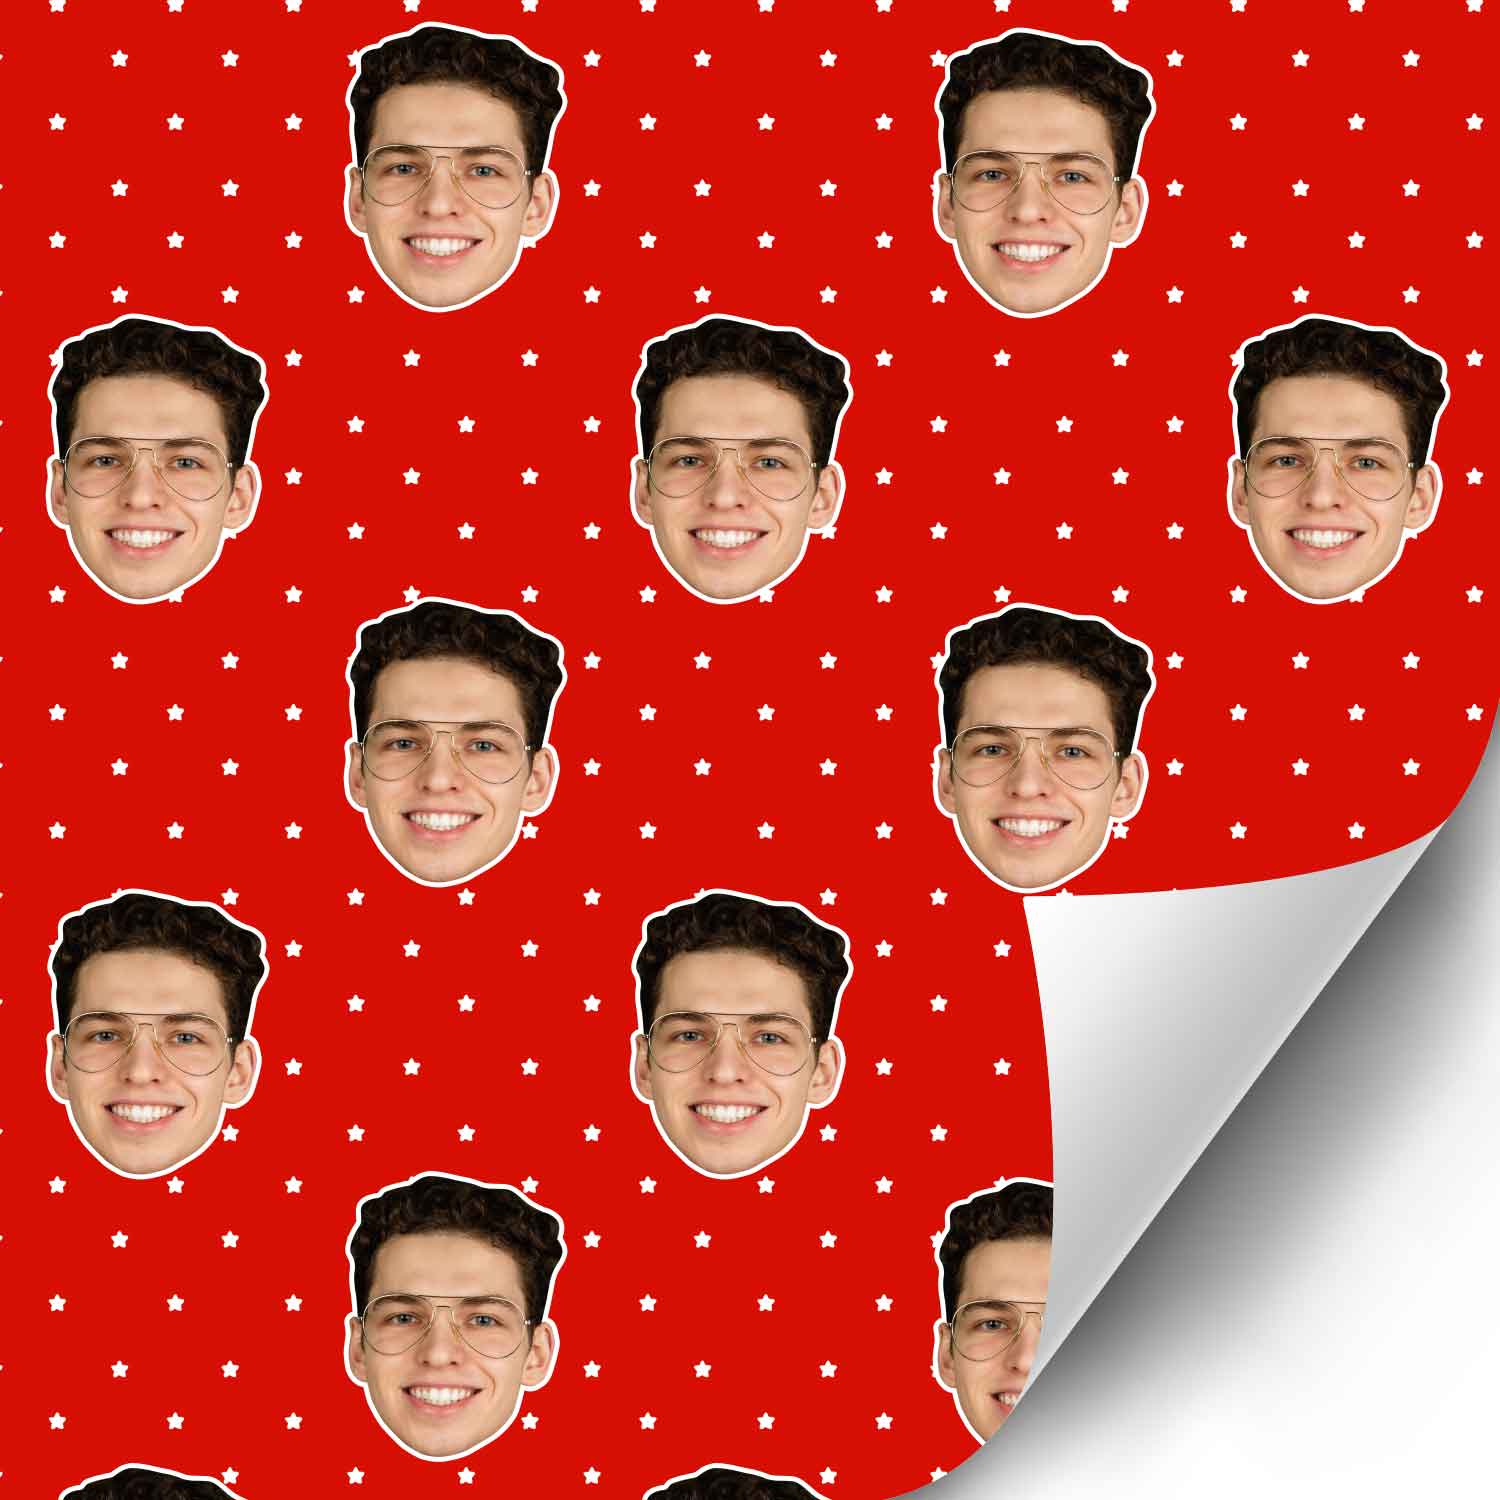 Your Face Stars Wrapping Paper